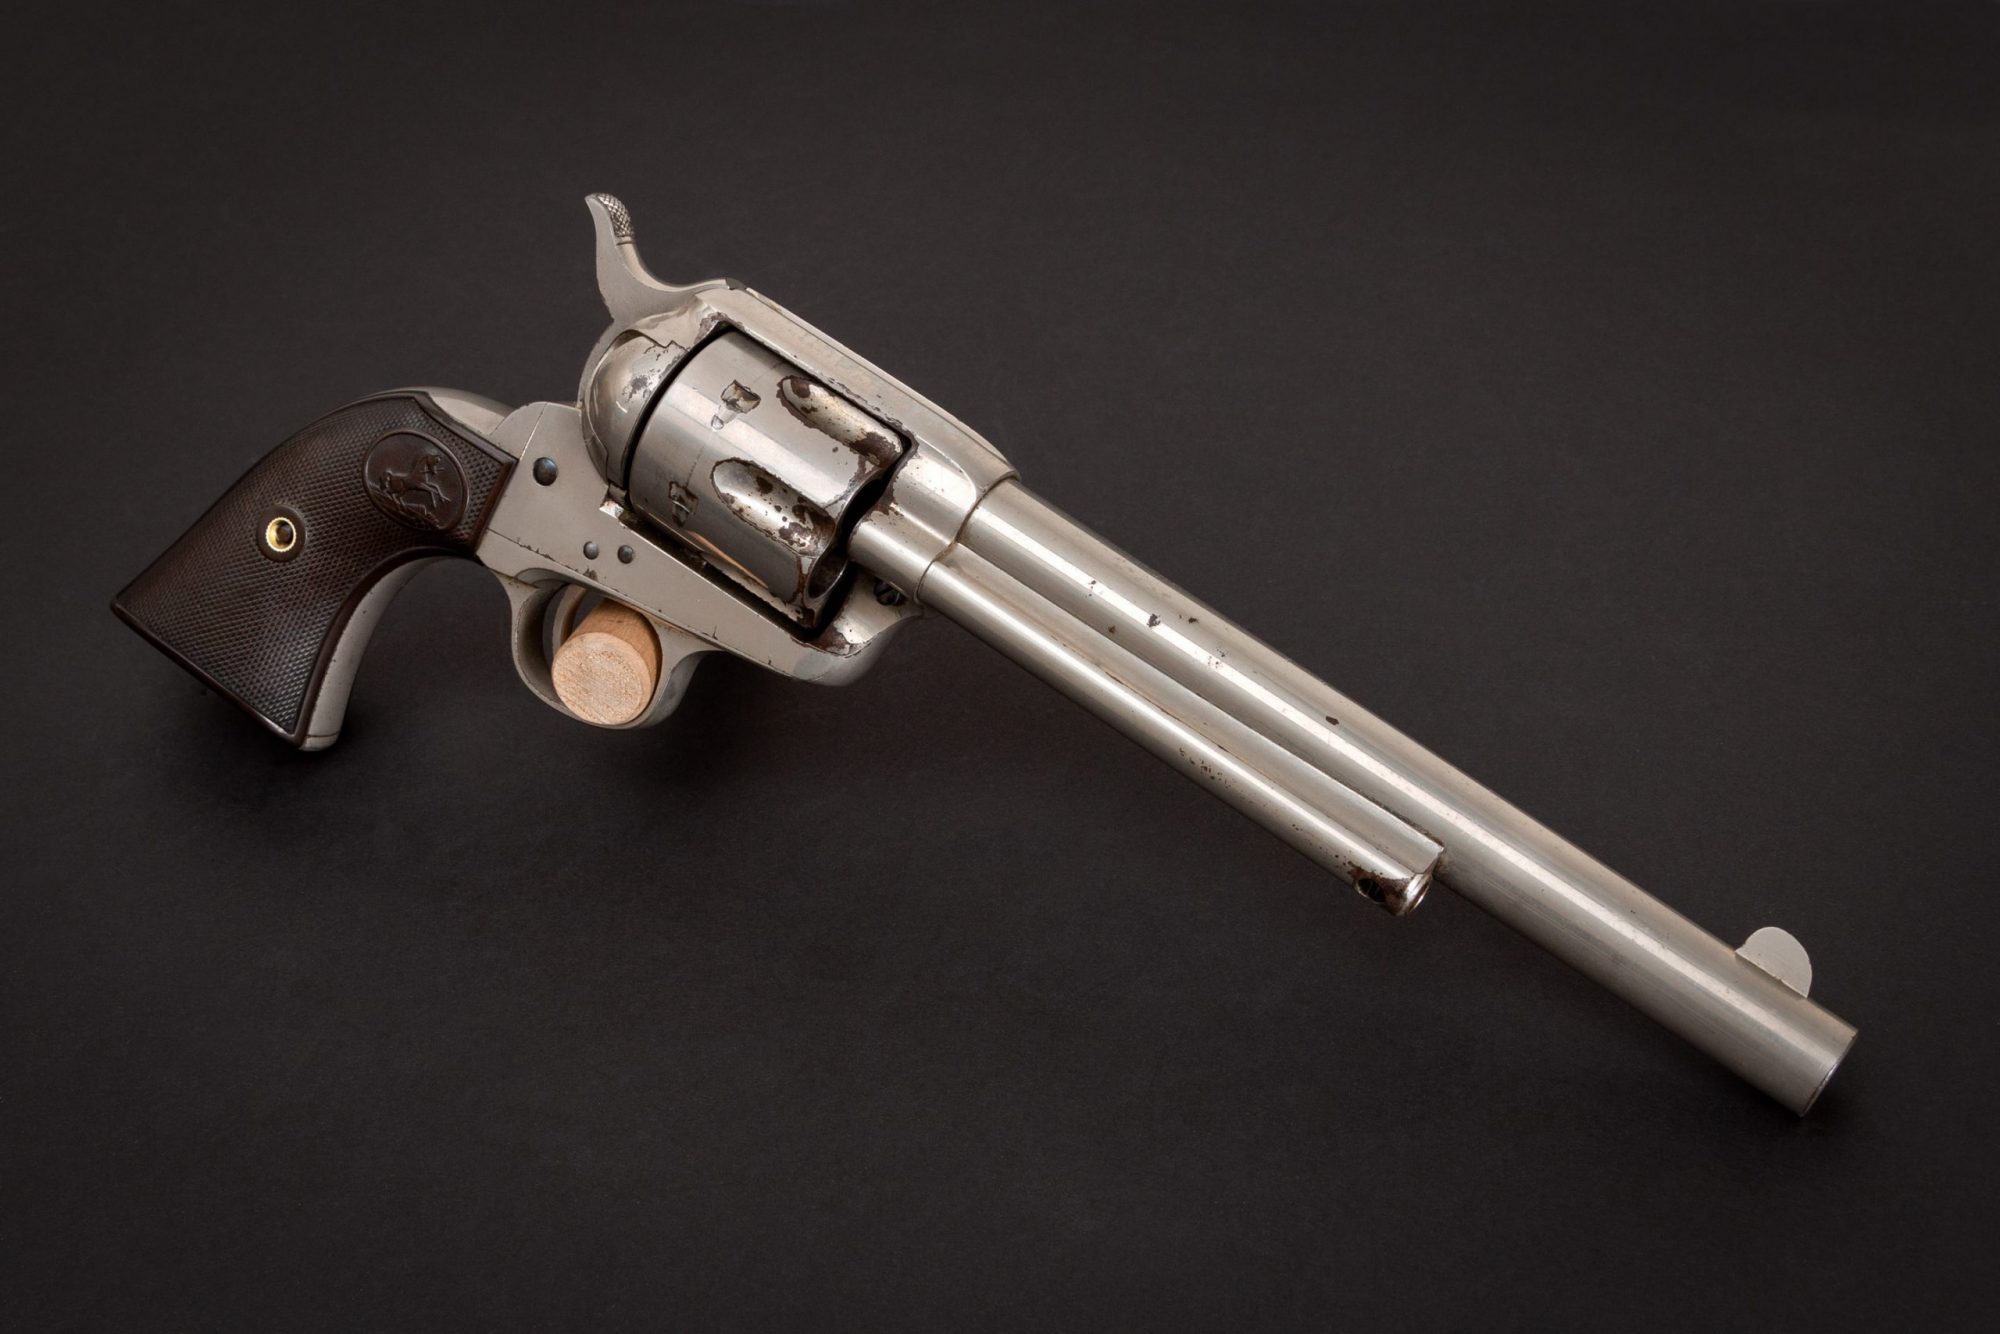 Photo of a first generation Colt Single Action Army revolver from 1897, with original nickel and nitre finishes